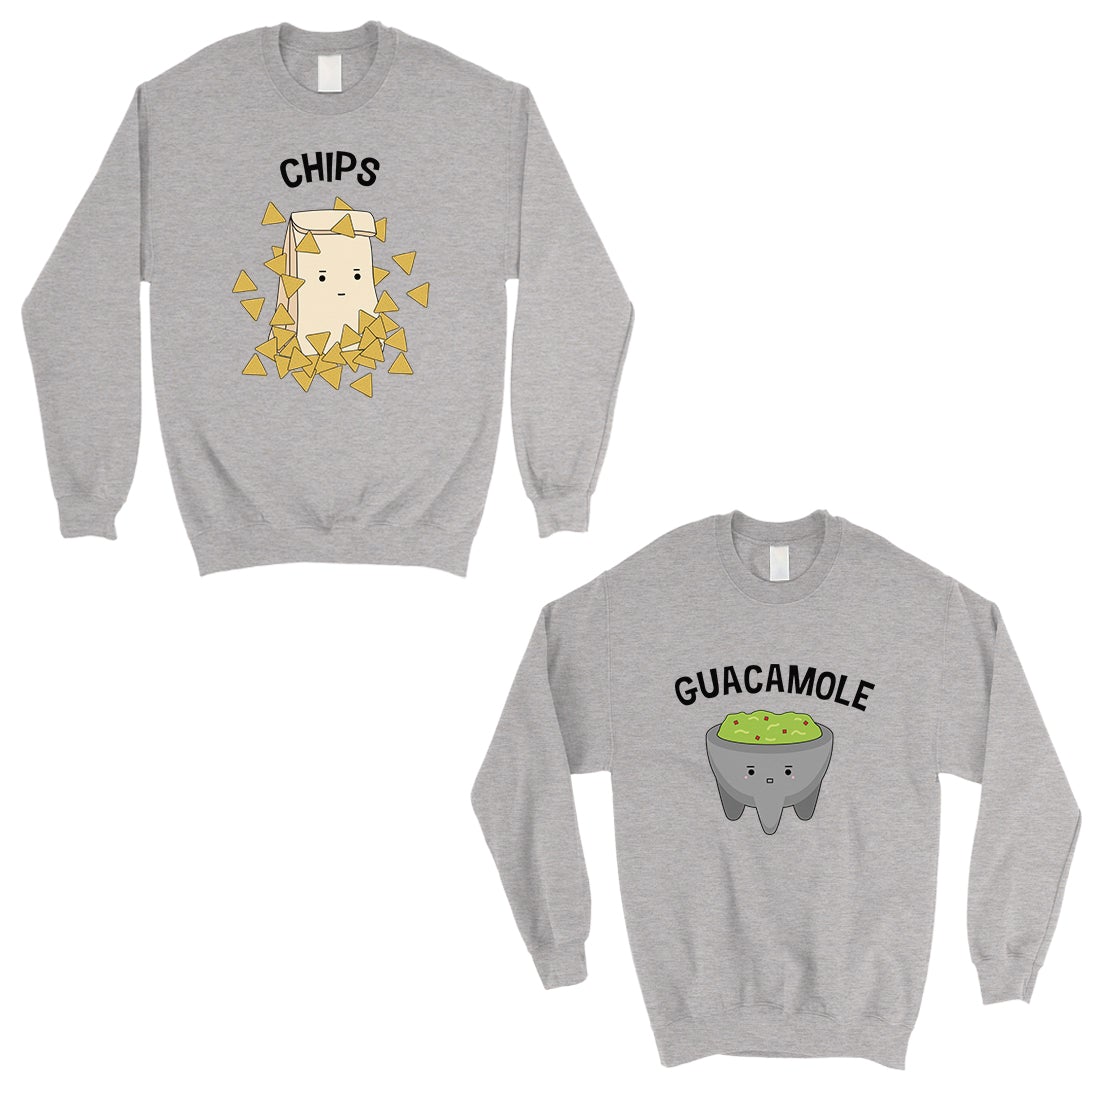 Chips & Guacamole Matching Sweatshirt Pullover Cute Couples Gift Gray